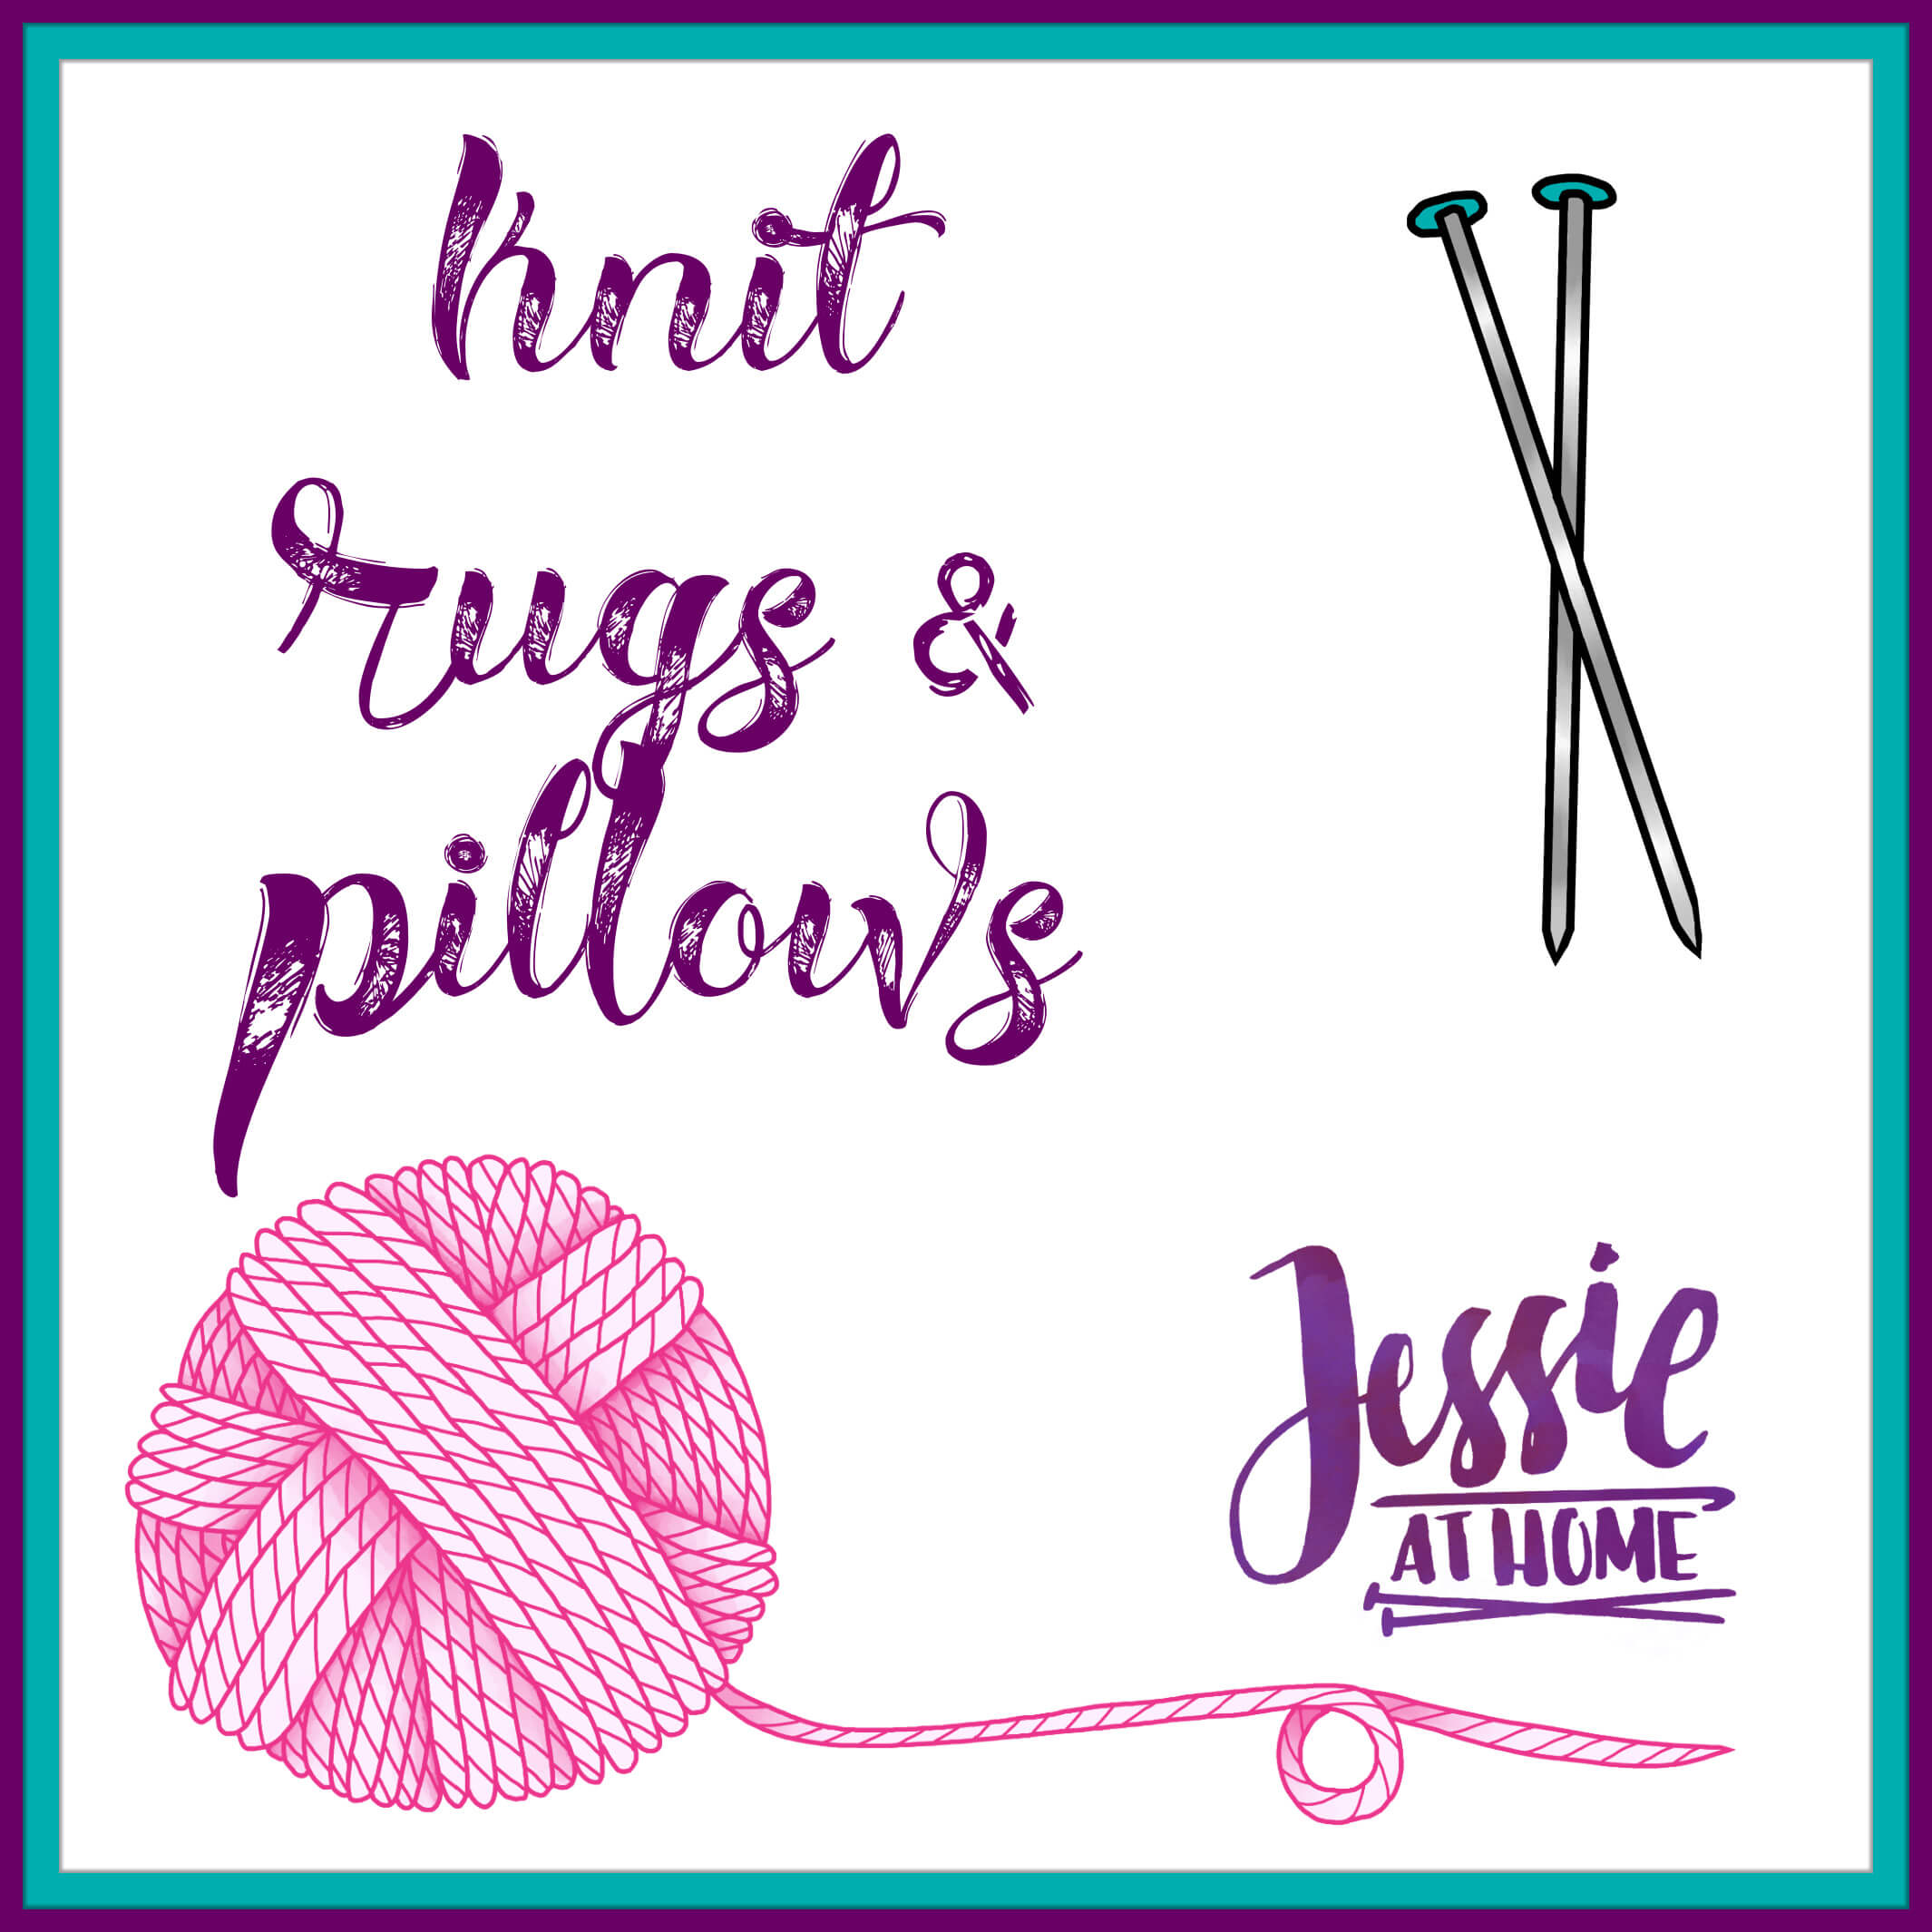 Knit Rugs & Pillows Menu on Jessie At Home